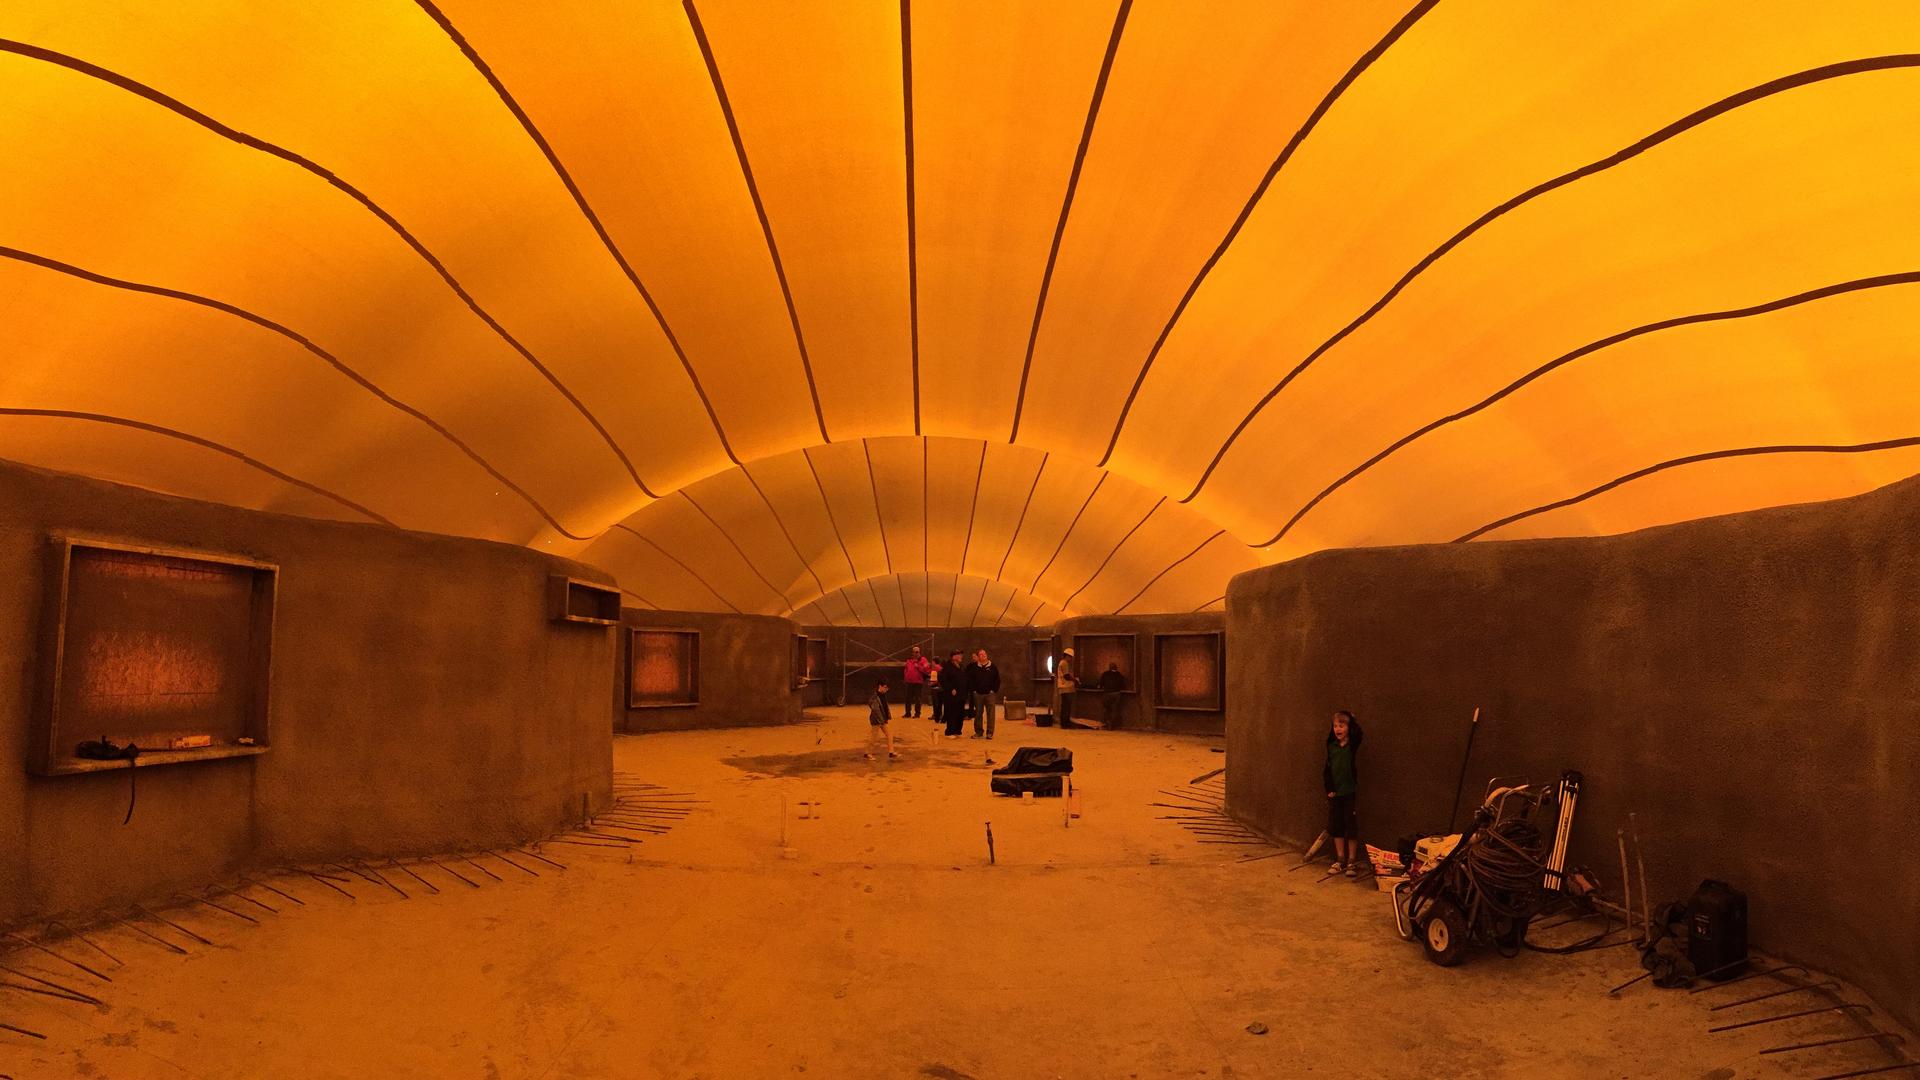 Inside the inflated Airform membrane.